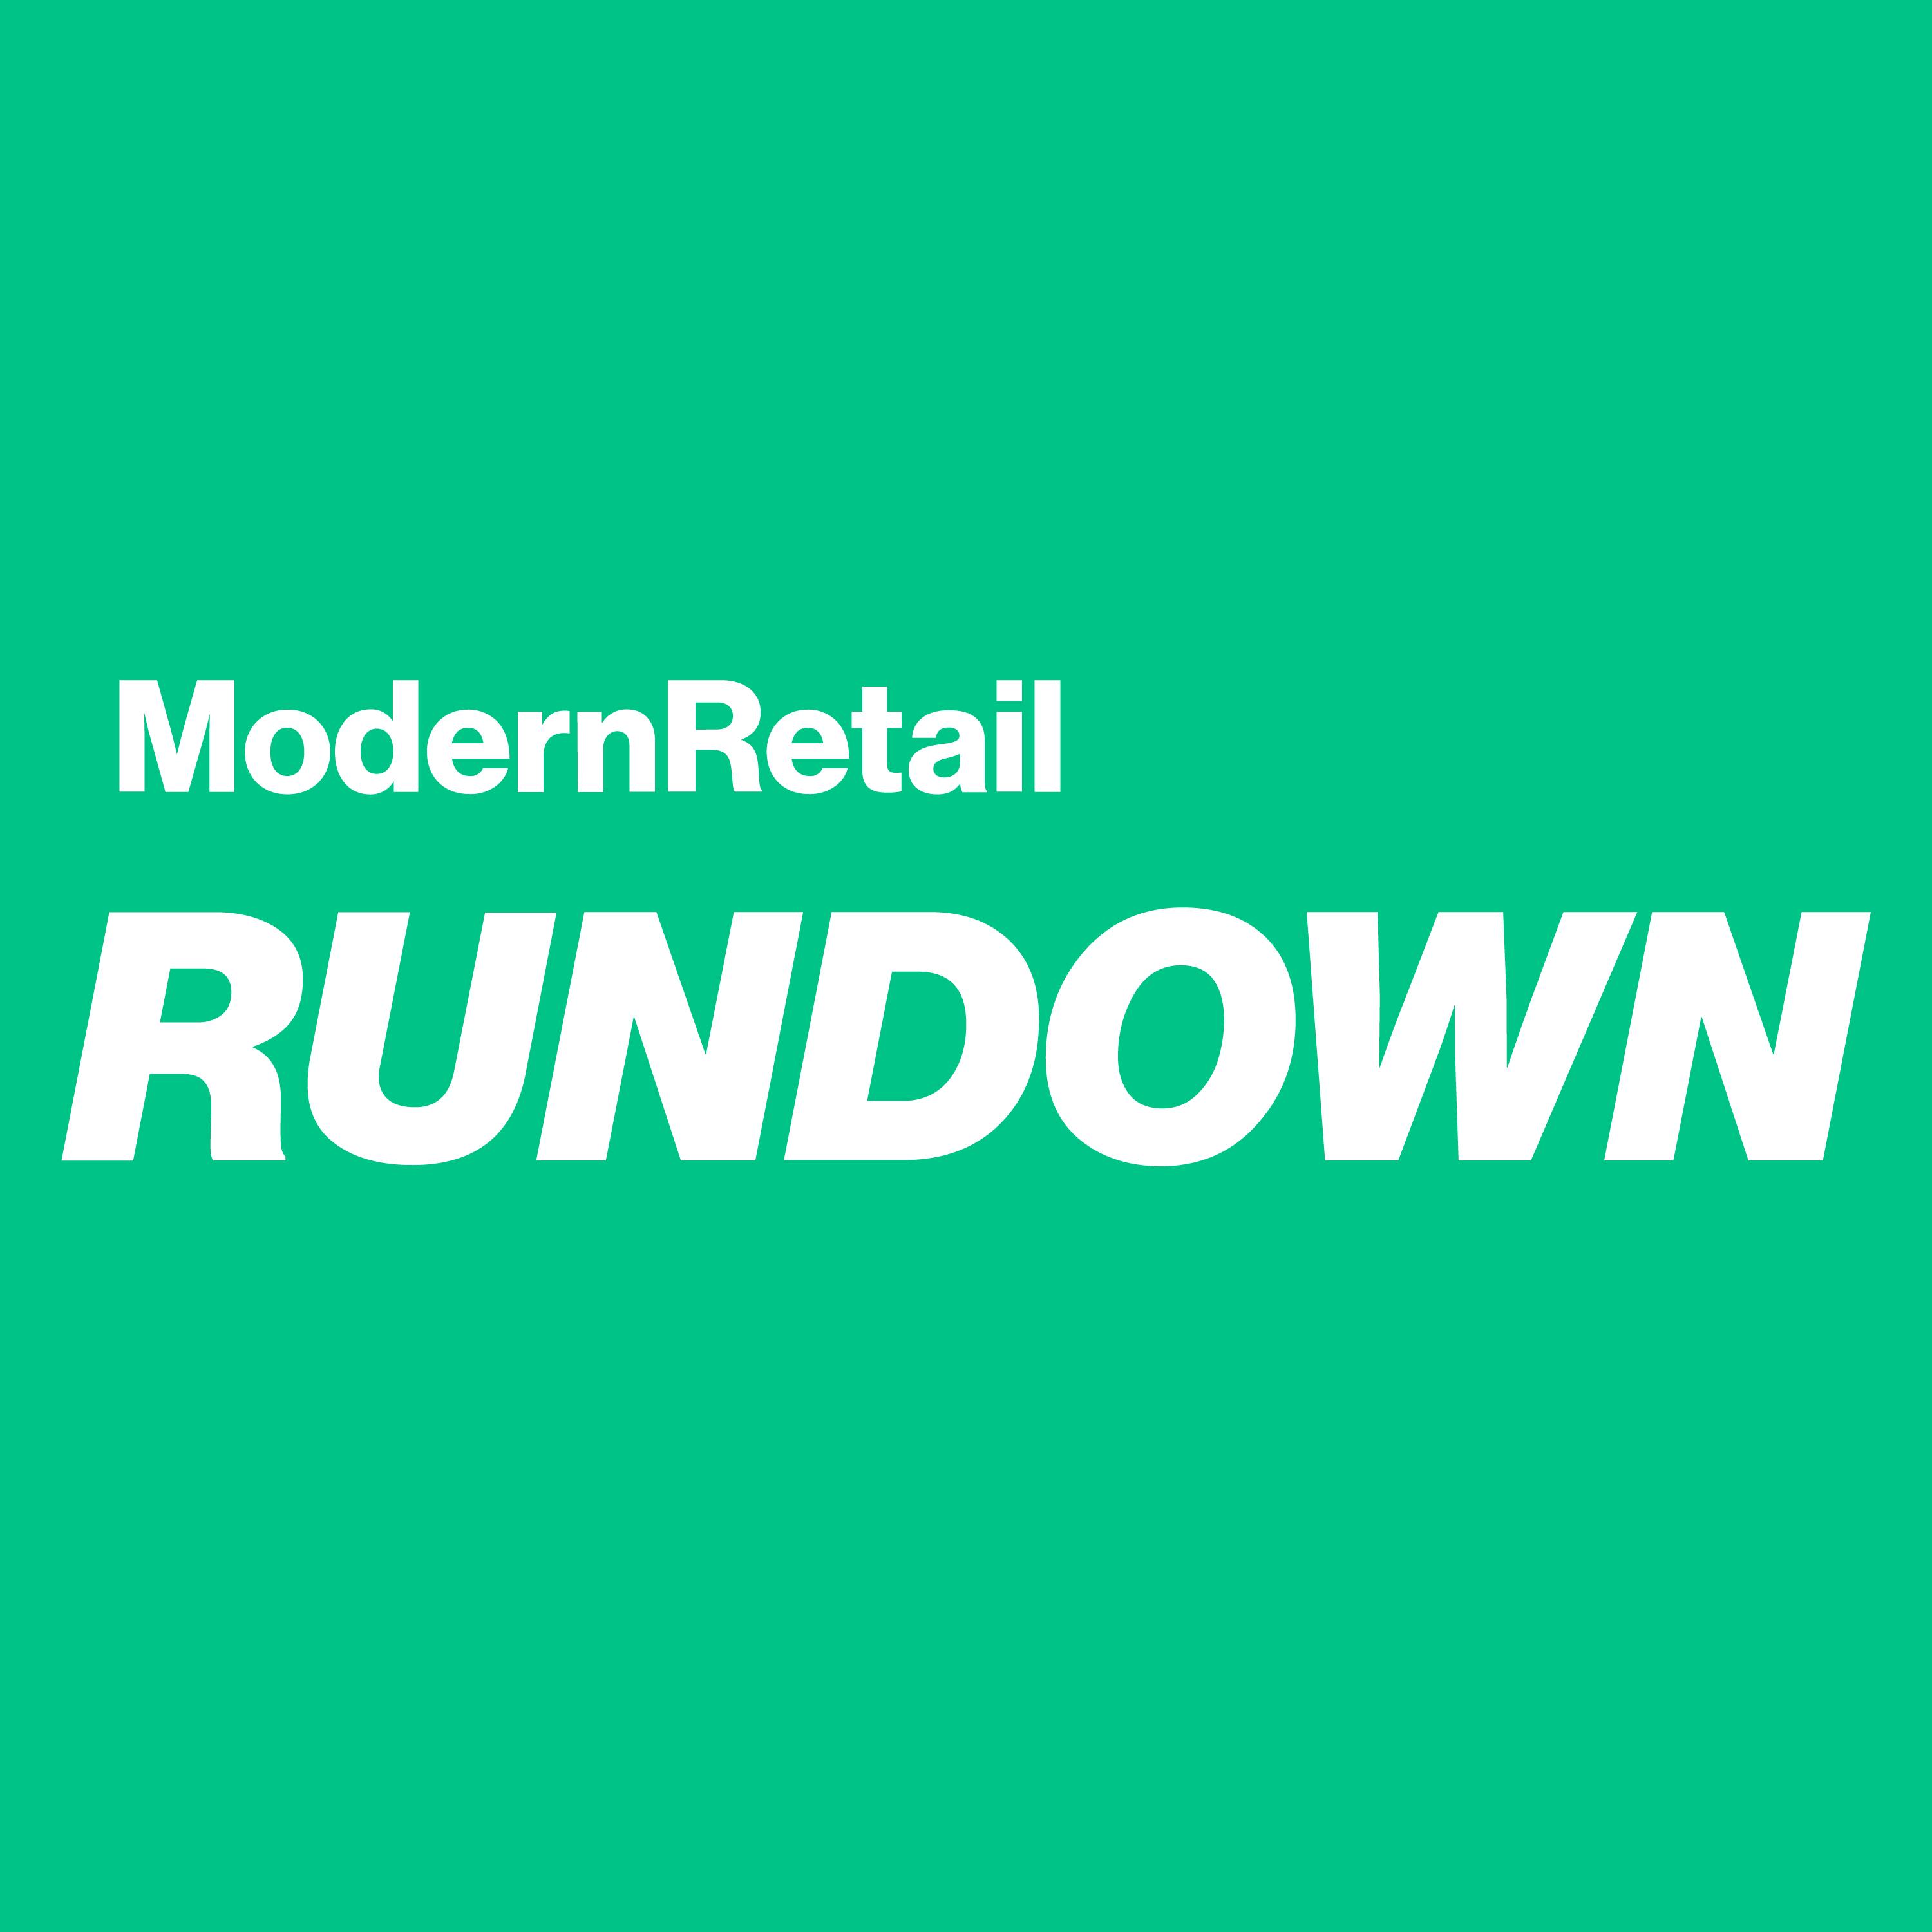 Rundown: Starbucks stores struggle, Walmart launches a new private label line & Dave & Buster’s bets on betting